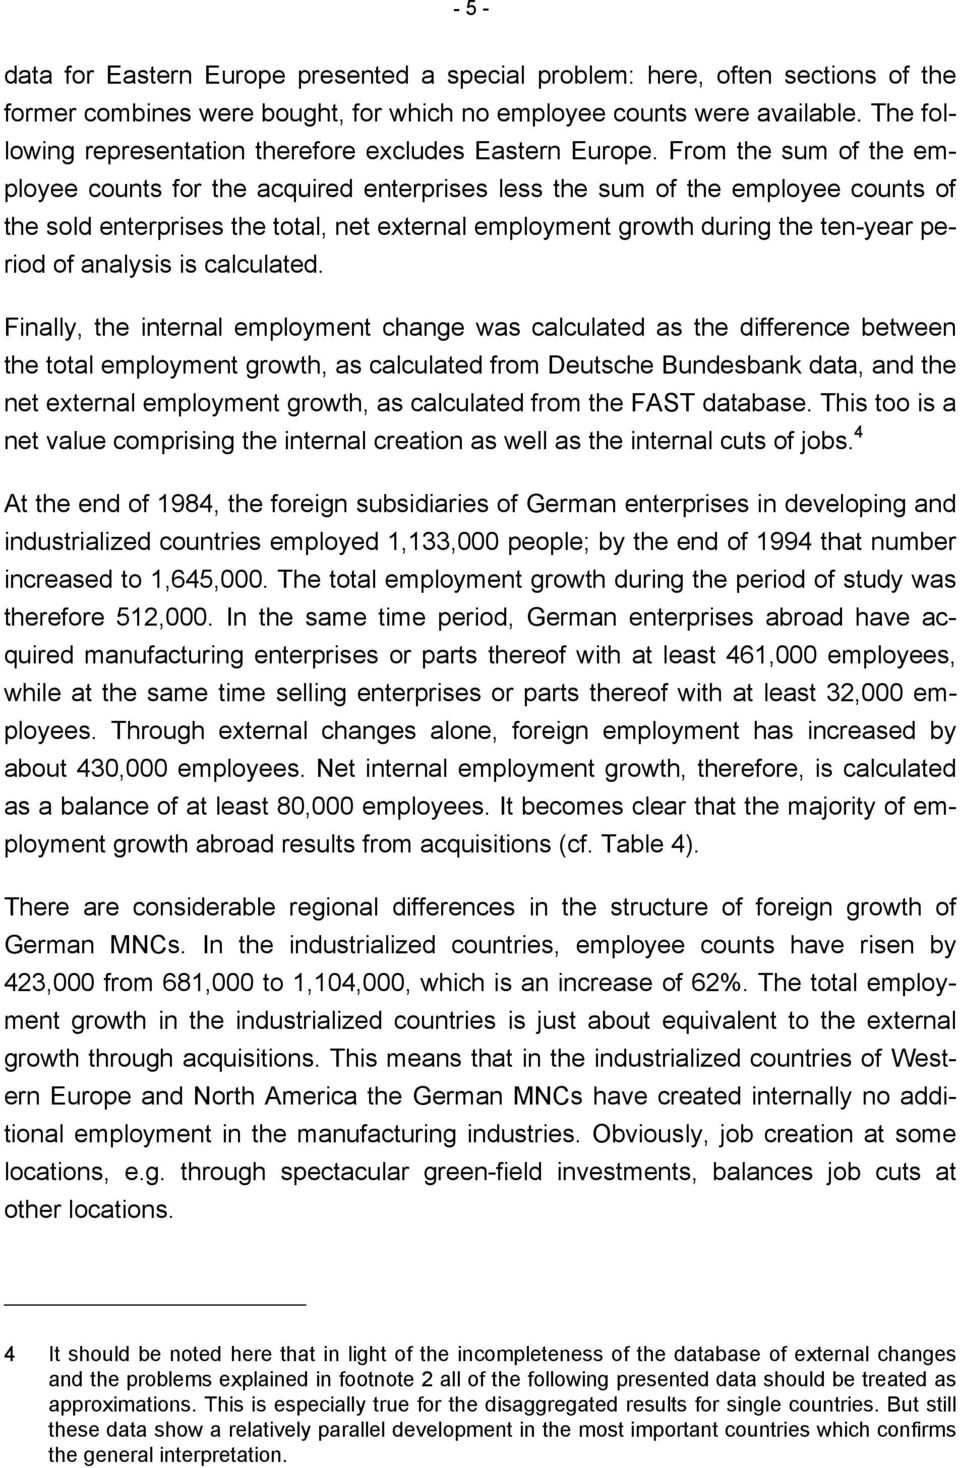 From the sum of the employee counts for the acquired enterprises less the sum of the employee counts of the sold enterprises the total, net external employment growth during the ten-year period of